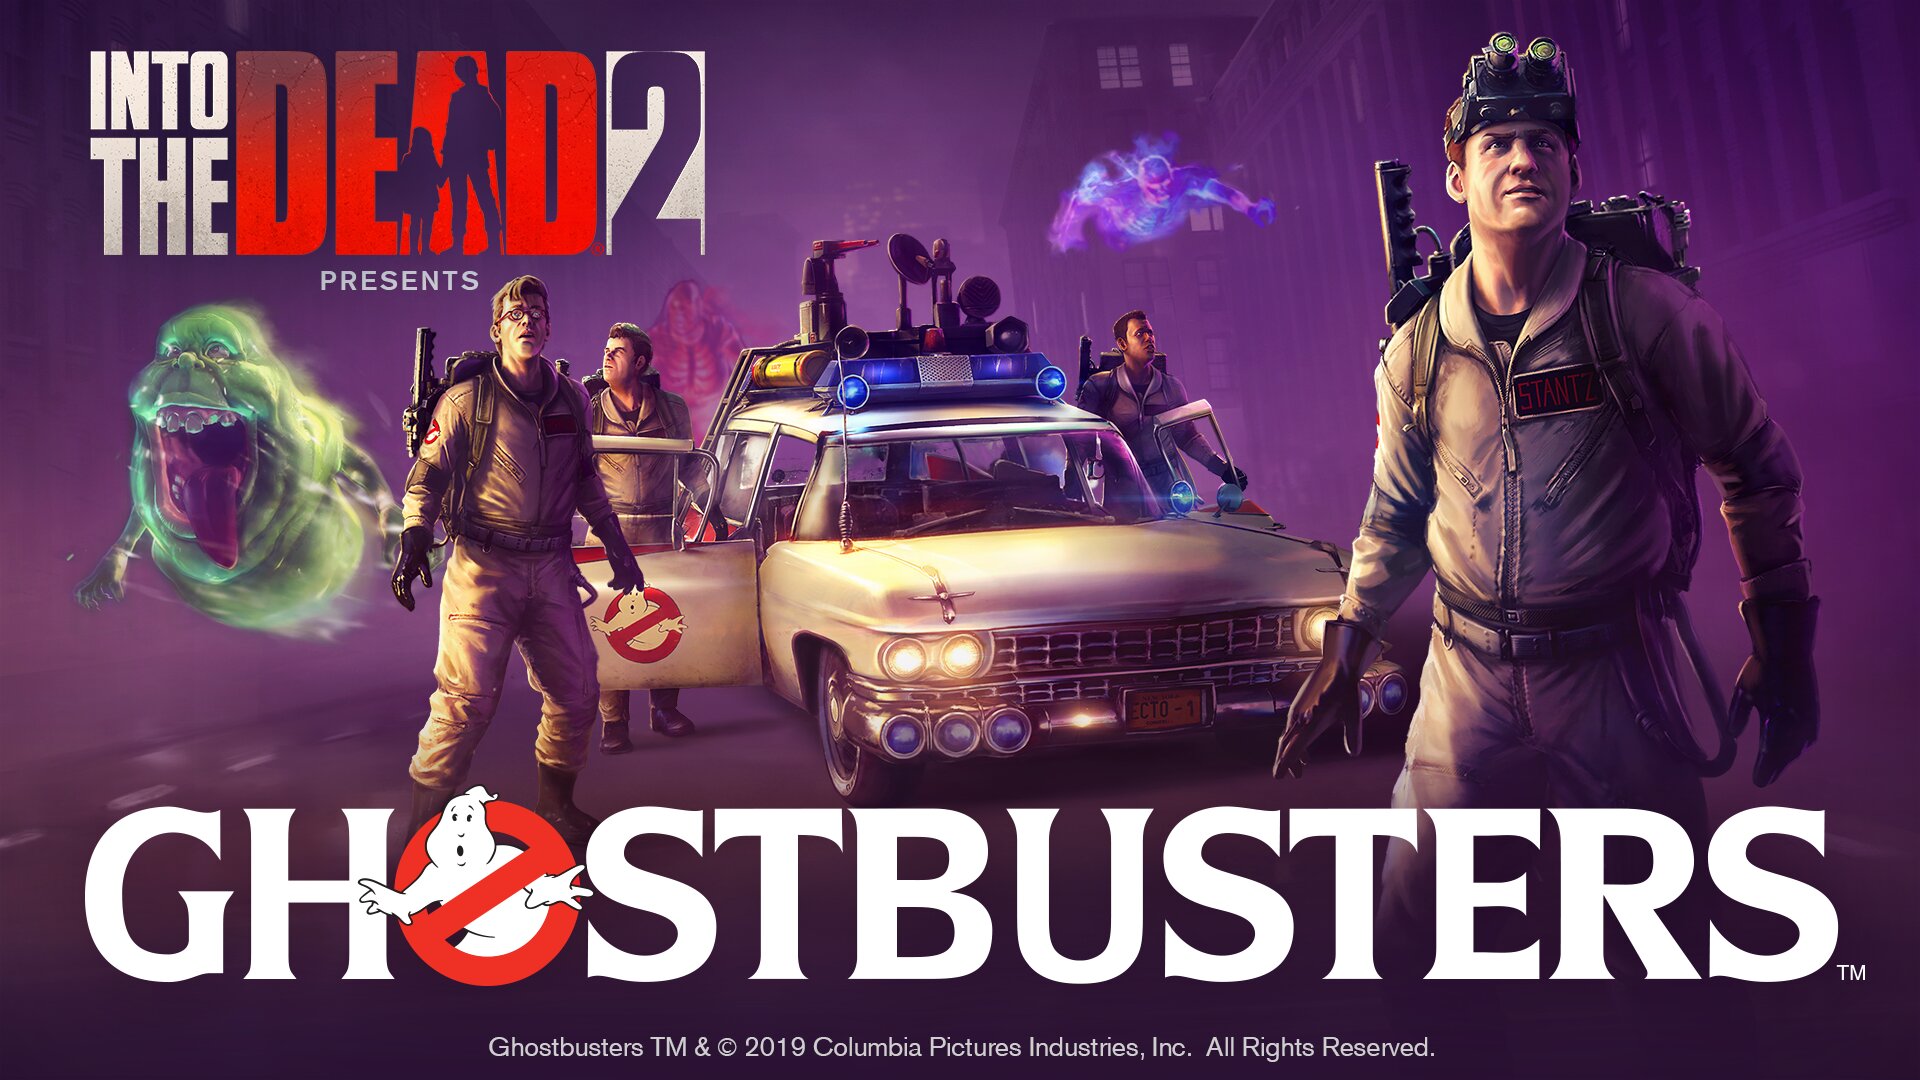 Into the Dead 2: Ghostbusters Add On